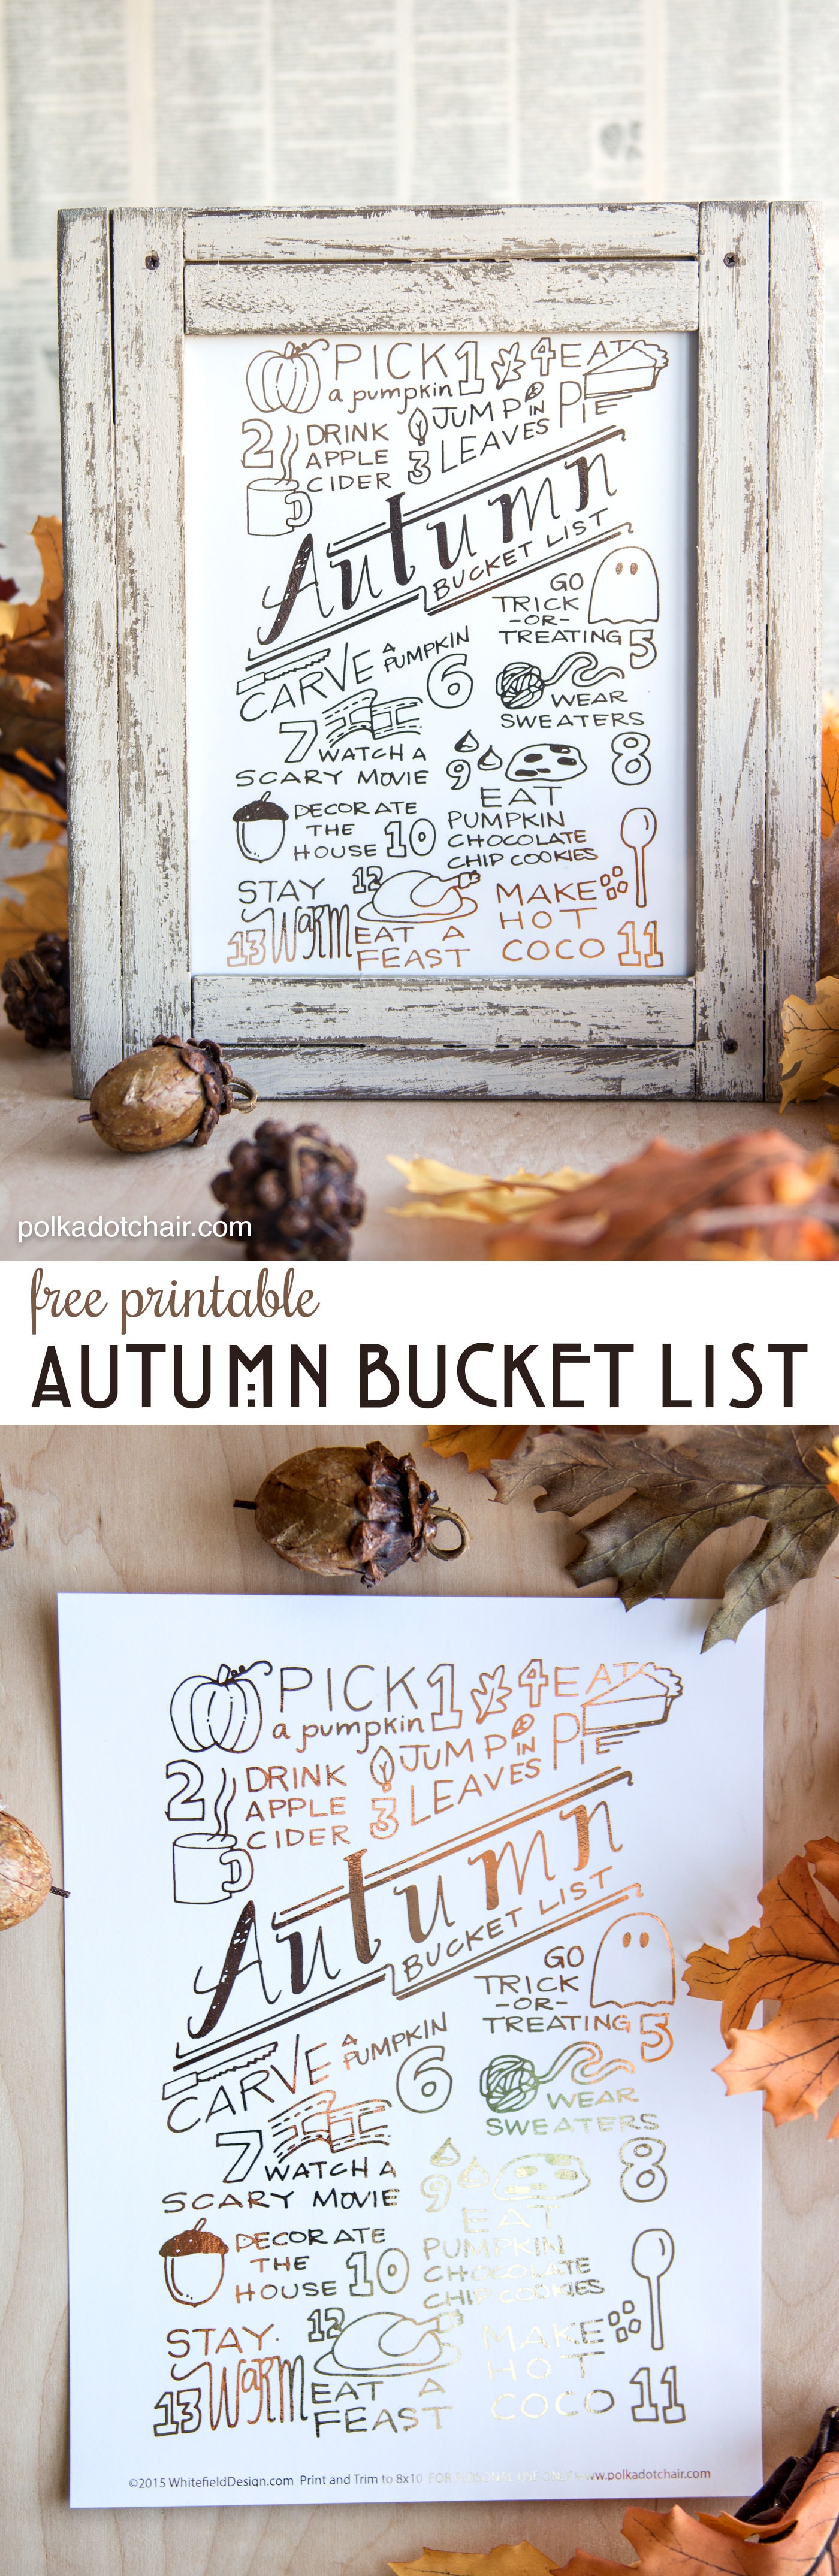 The Ultimate Autumn and Fall Bucket List - you can download a copy of it on polkadotchair.com